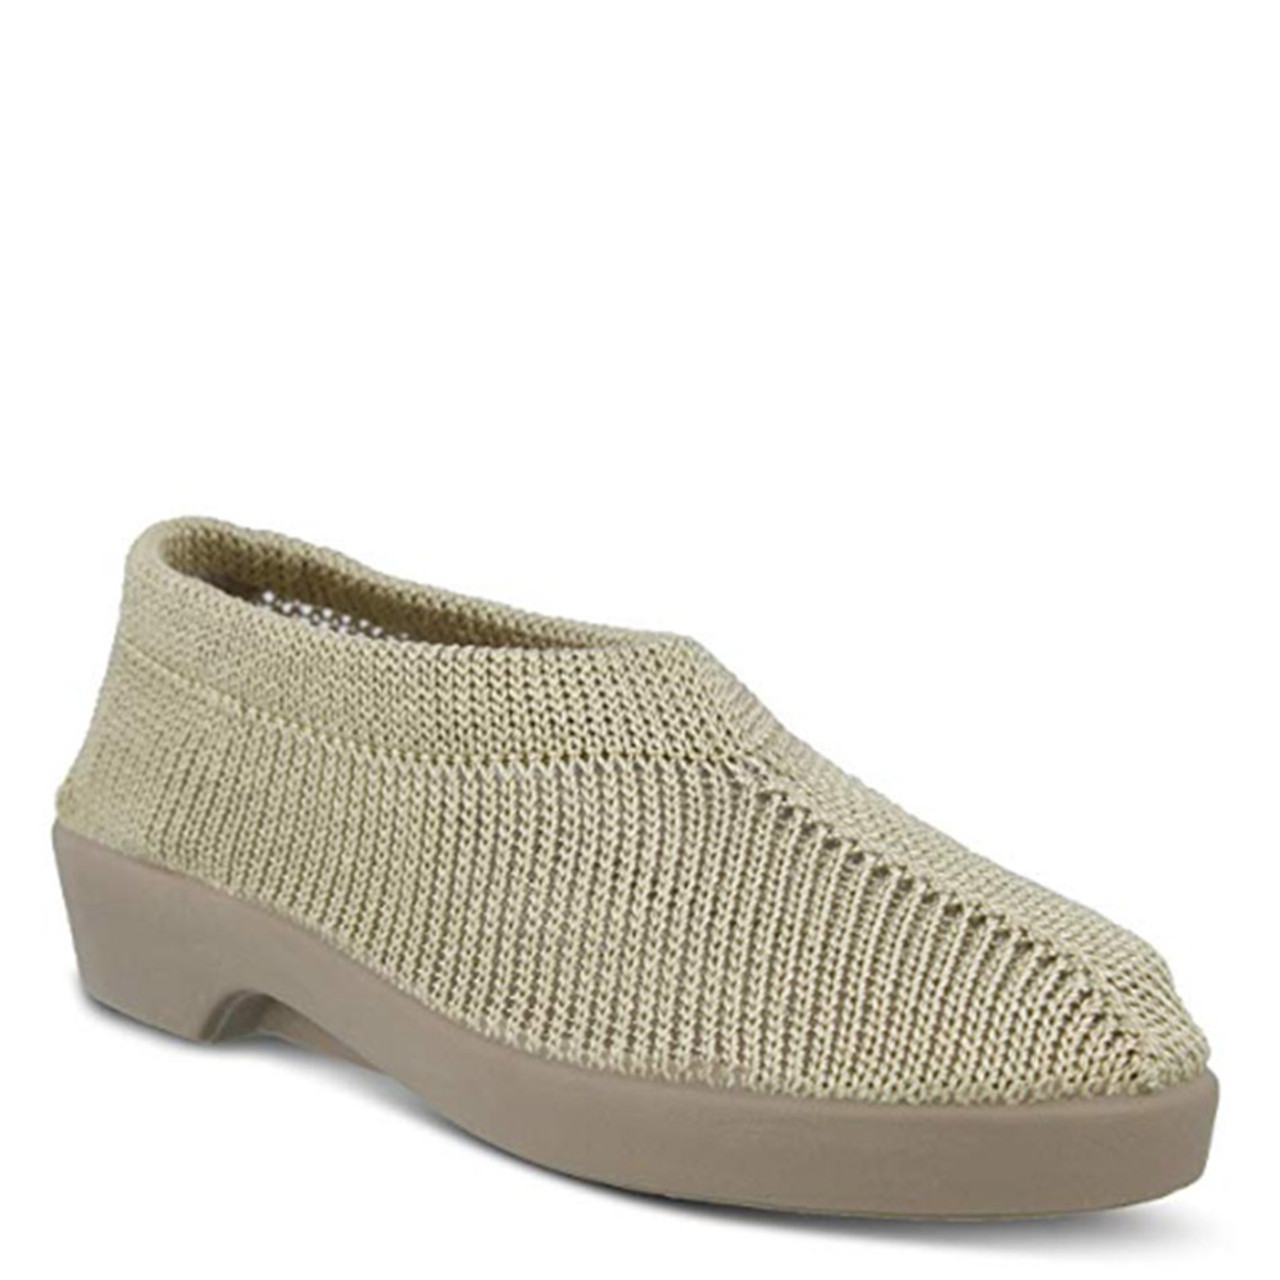 Plumex SOFT KNIT HOUSE SHOES Beige - Family Footwear Center